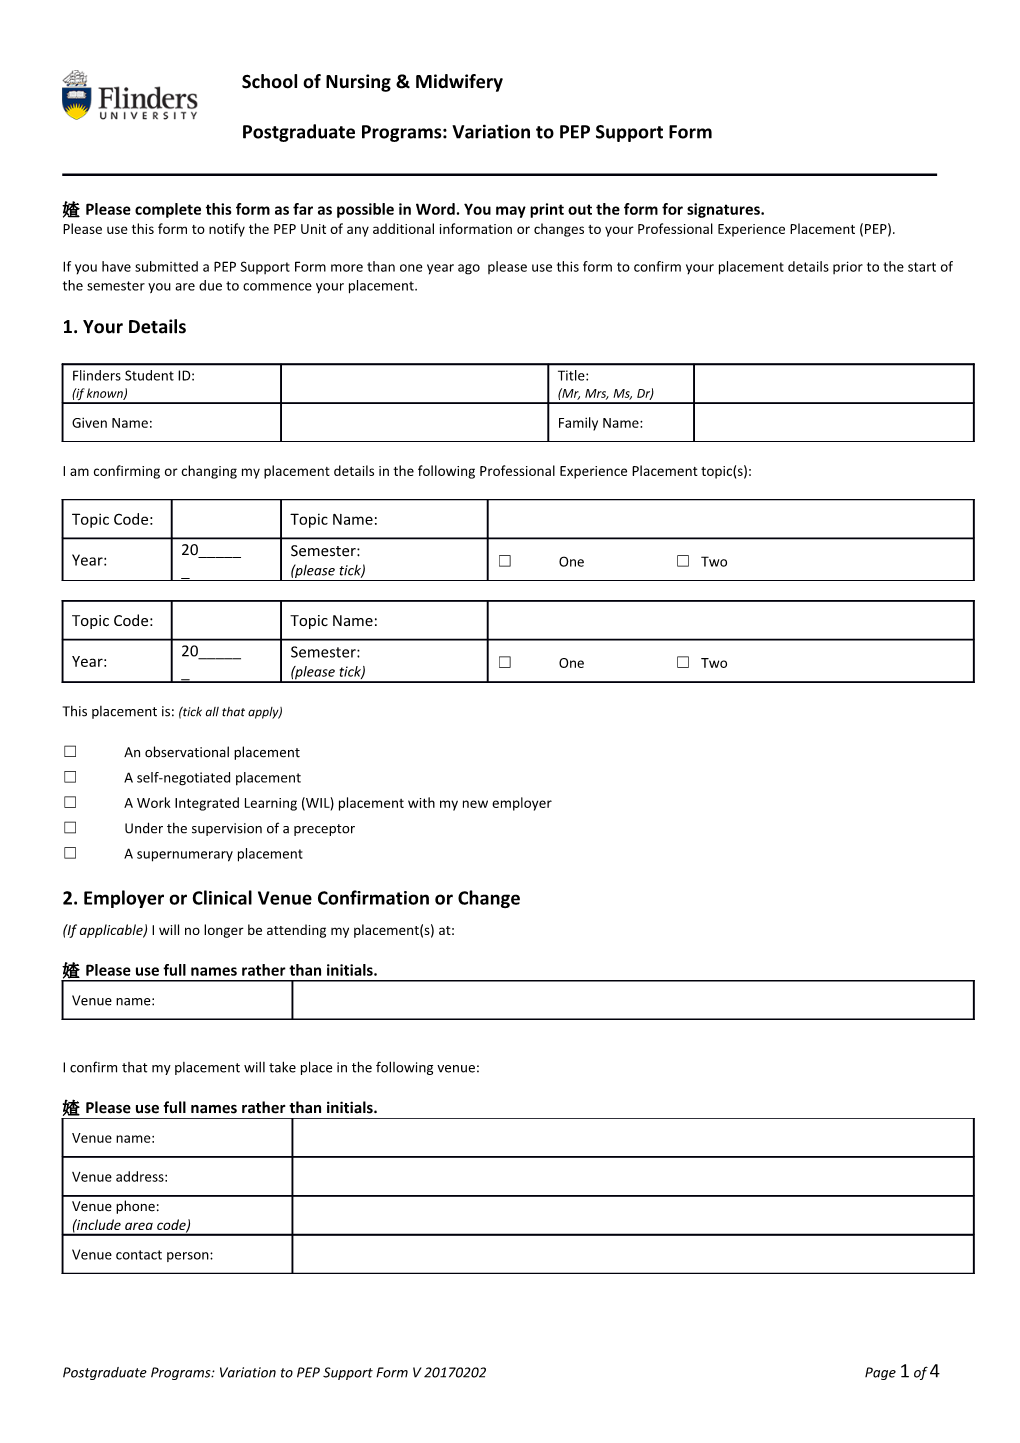 Please Complete This Form As Far As Possible in Word. You May Print out the Form For